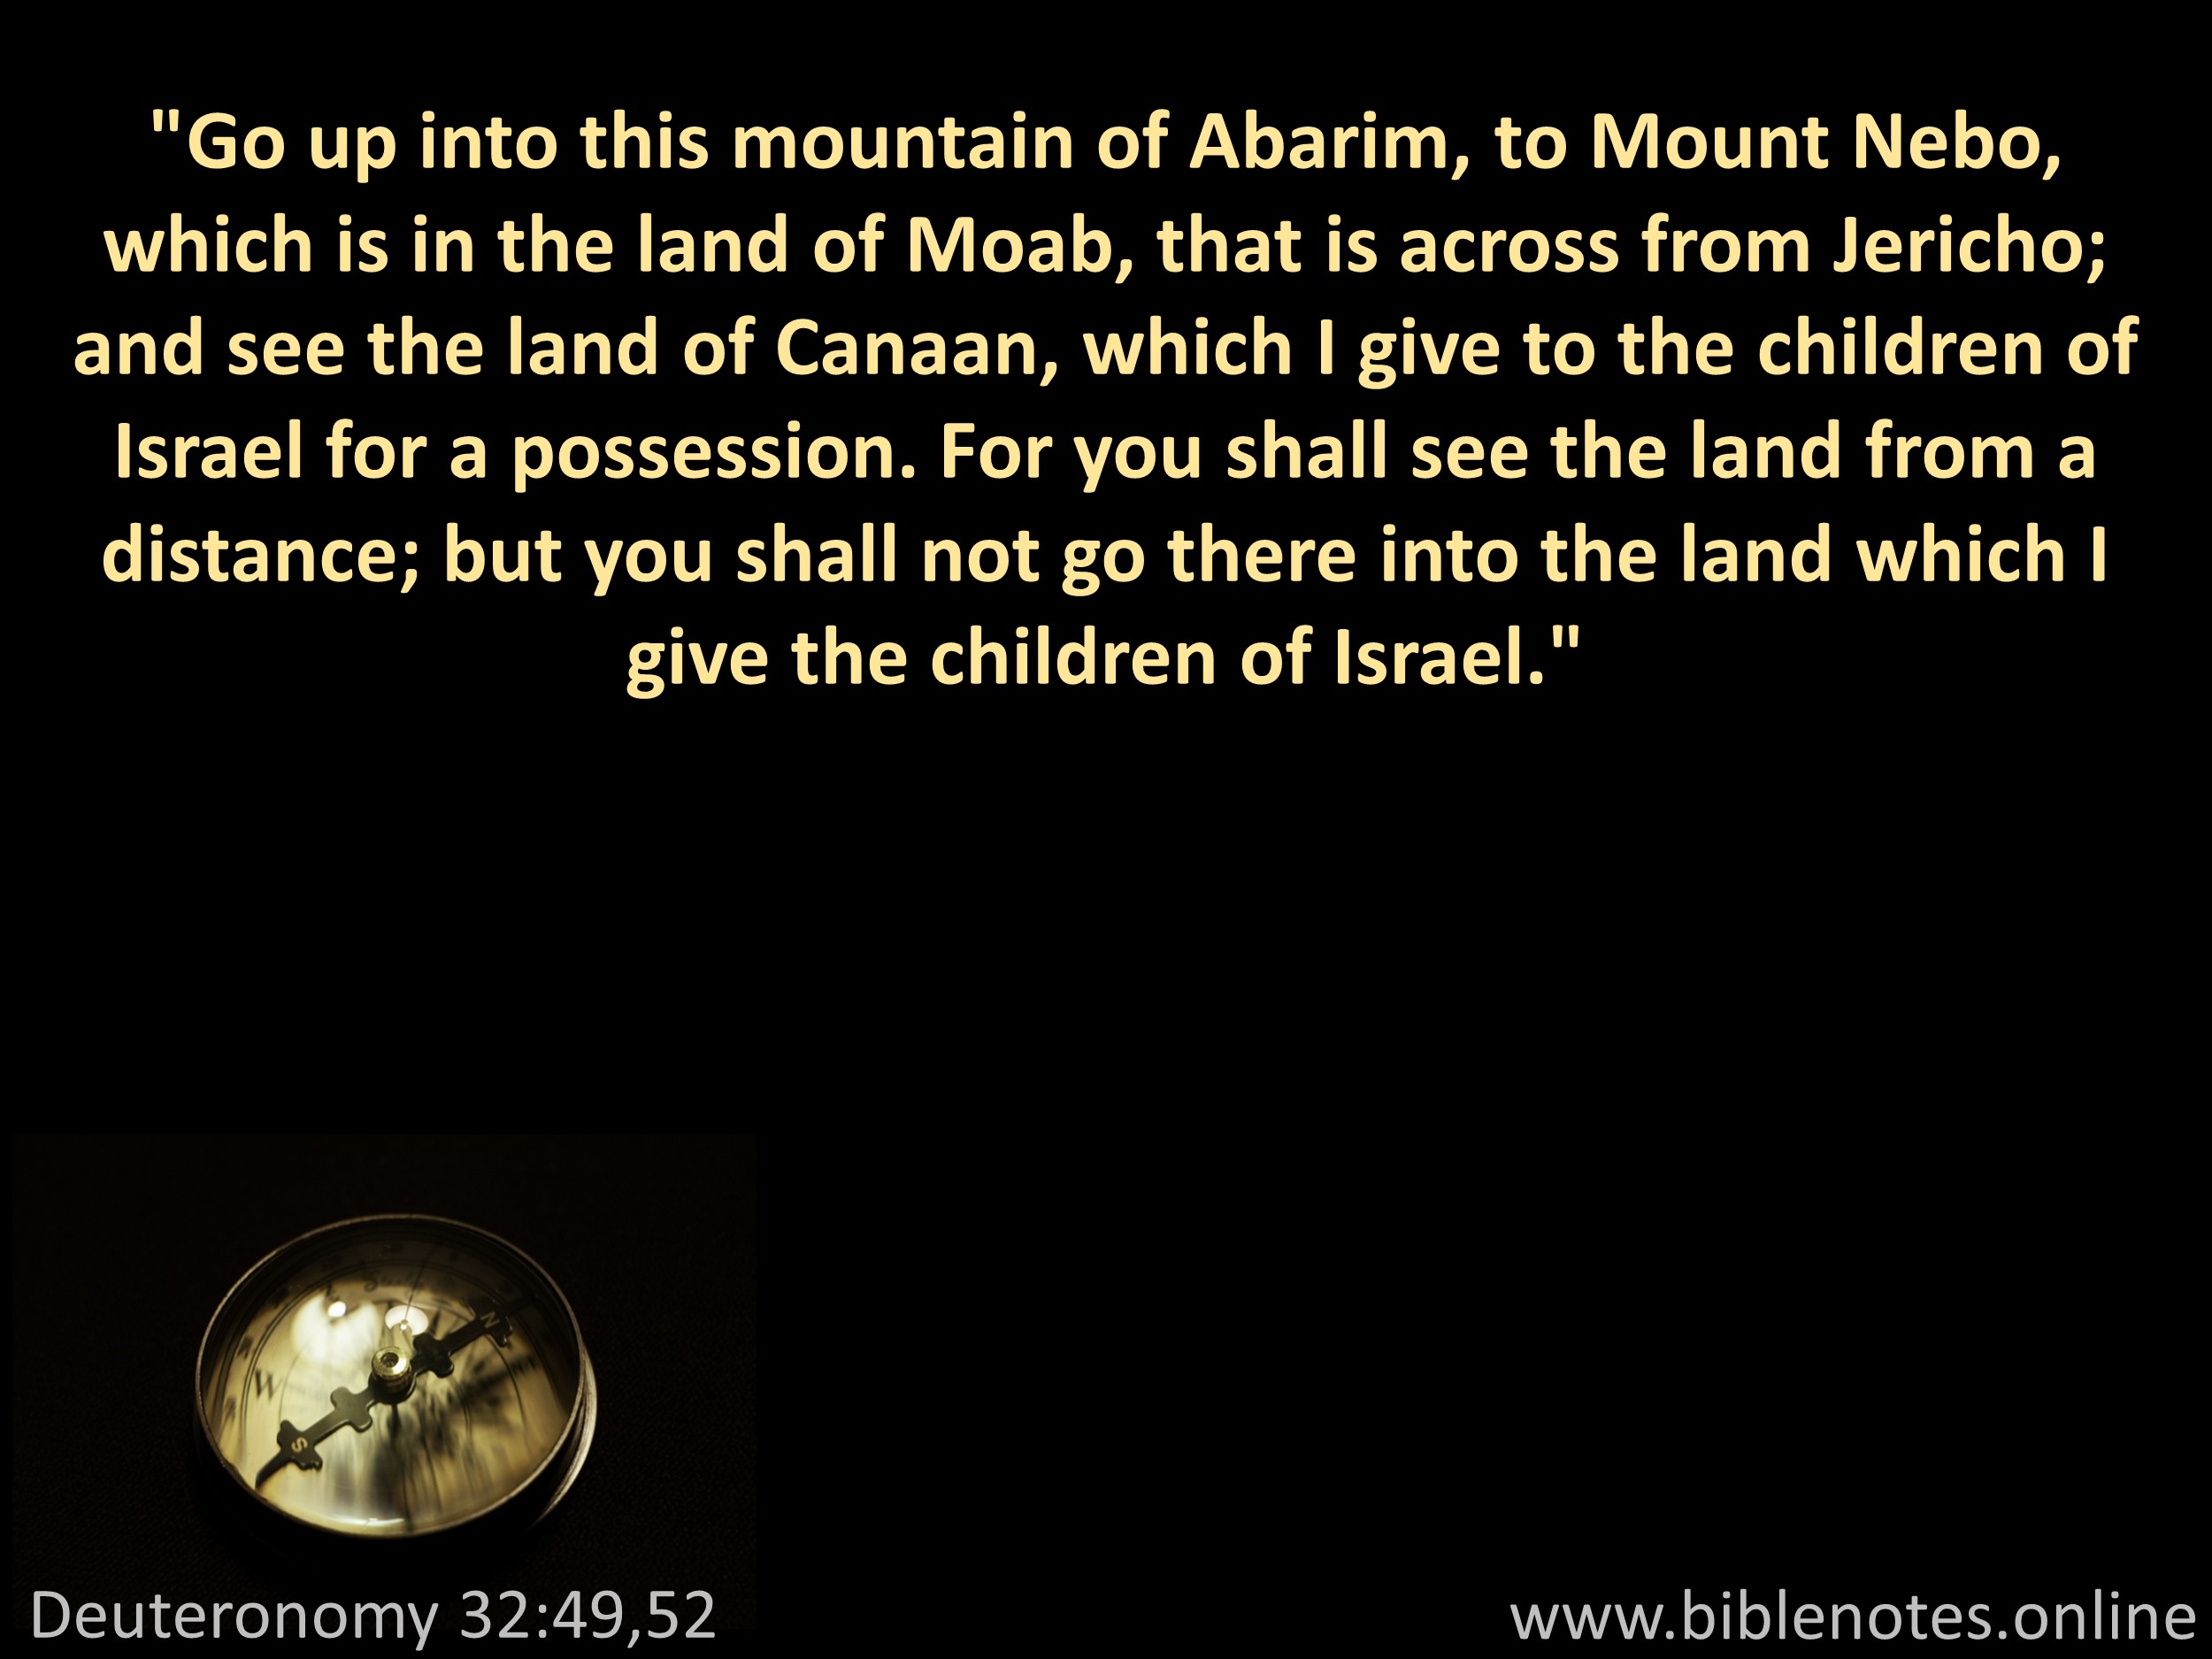 Bible Verse from Deuteronomy Chapter 32